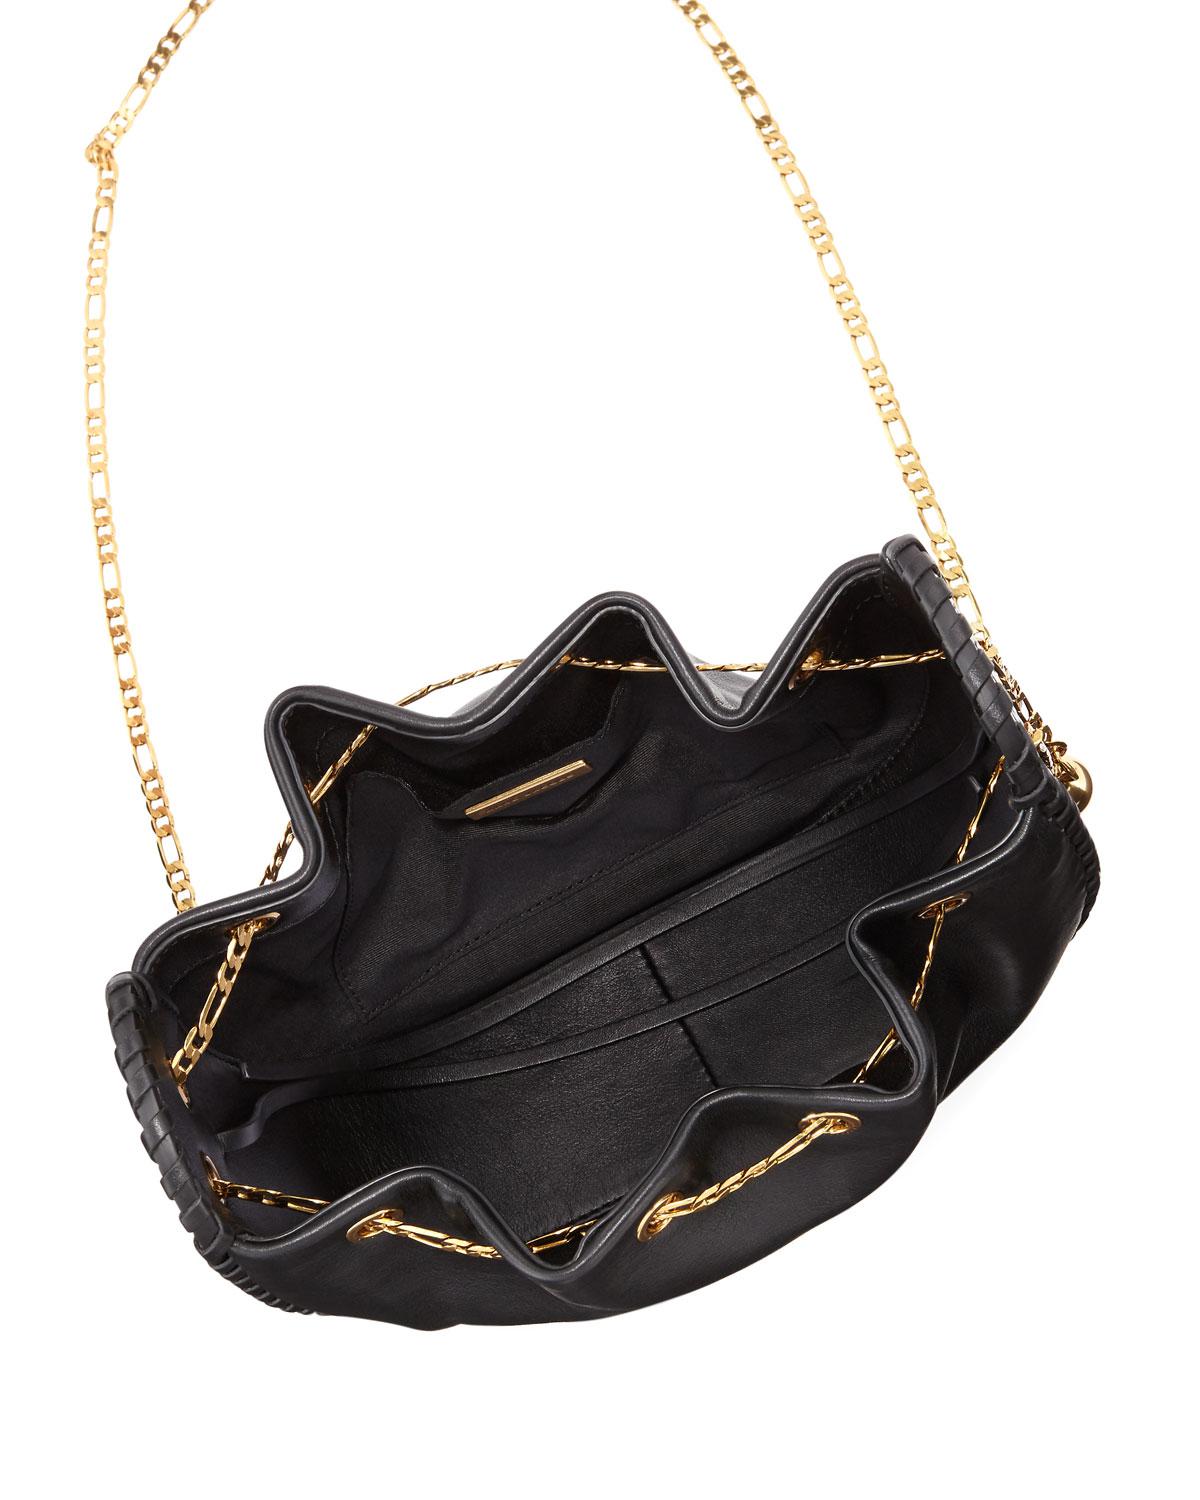 Marc Jacobs Sway Leather Bucket Crossbody Bag in Black - Lyst